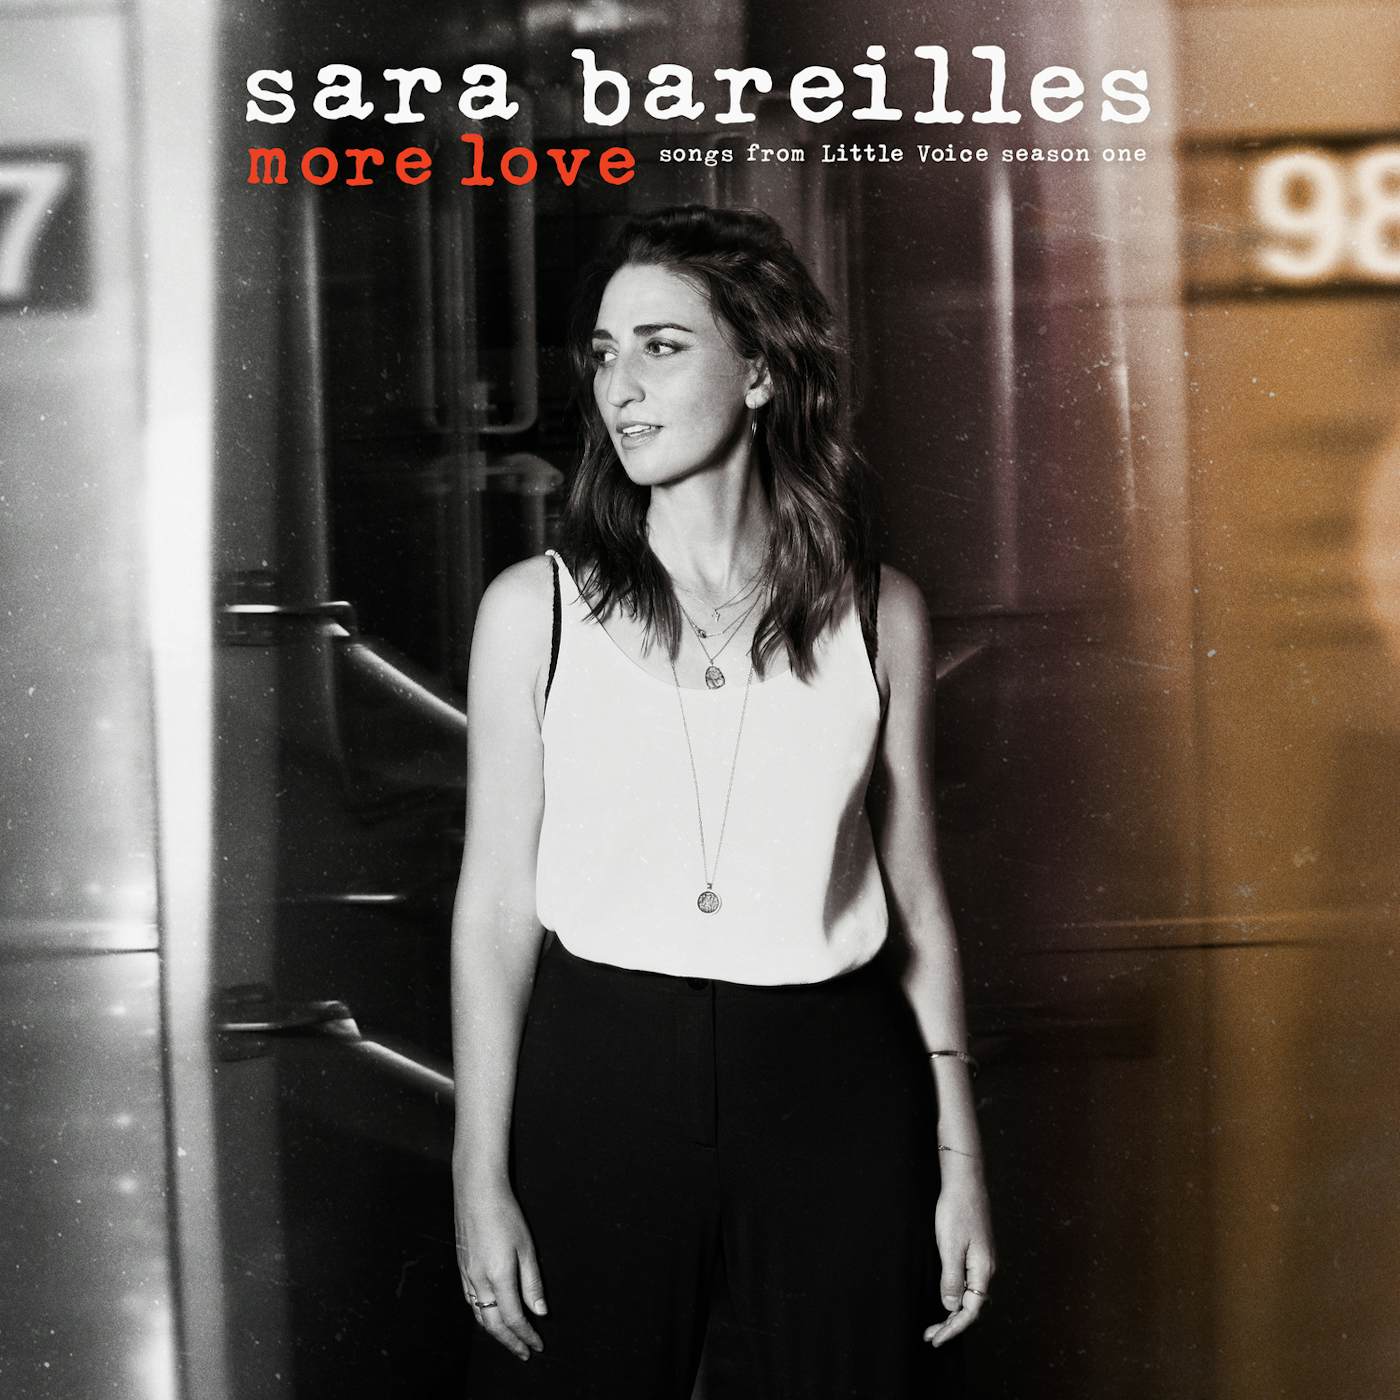 Sara Bareilles MORE LOVE - SONGS FROM LITTLE VOICE SEASON ONE CD